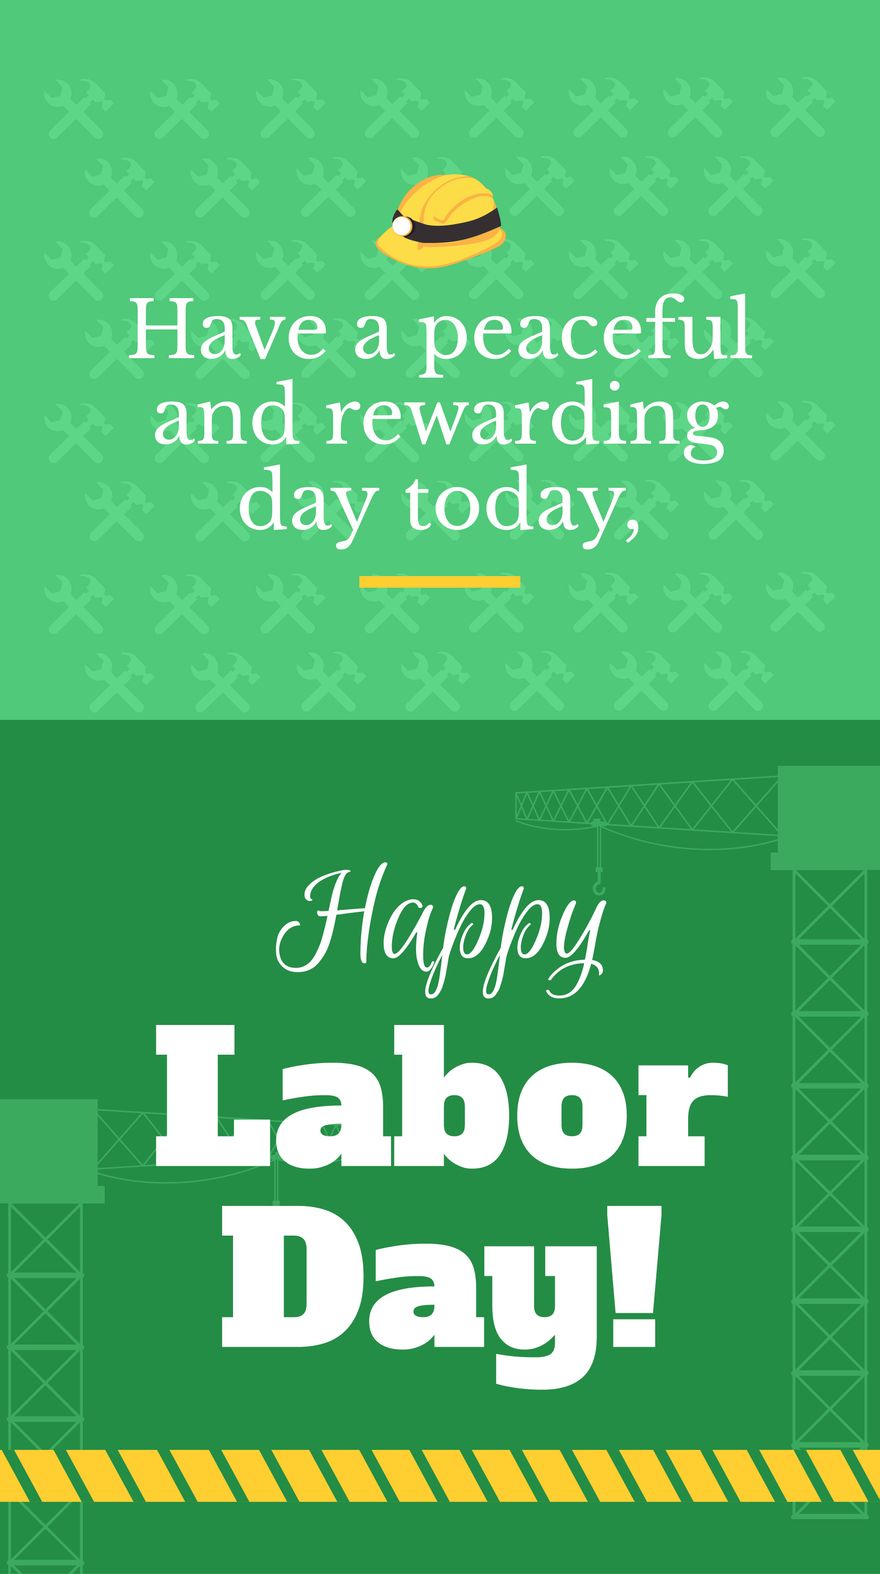 Free Labor Day Greeting Card Background in PDF, Illustrator, PSD, EPS, SVG, JPG, PNG